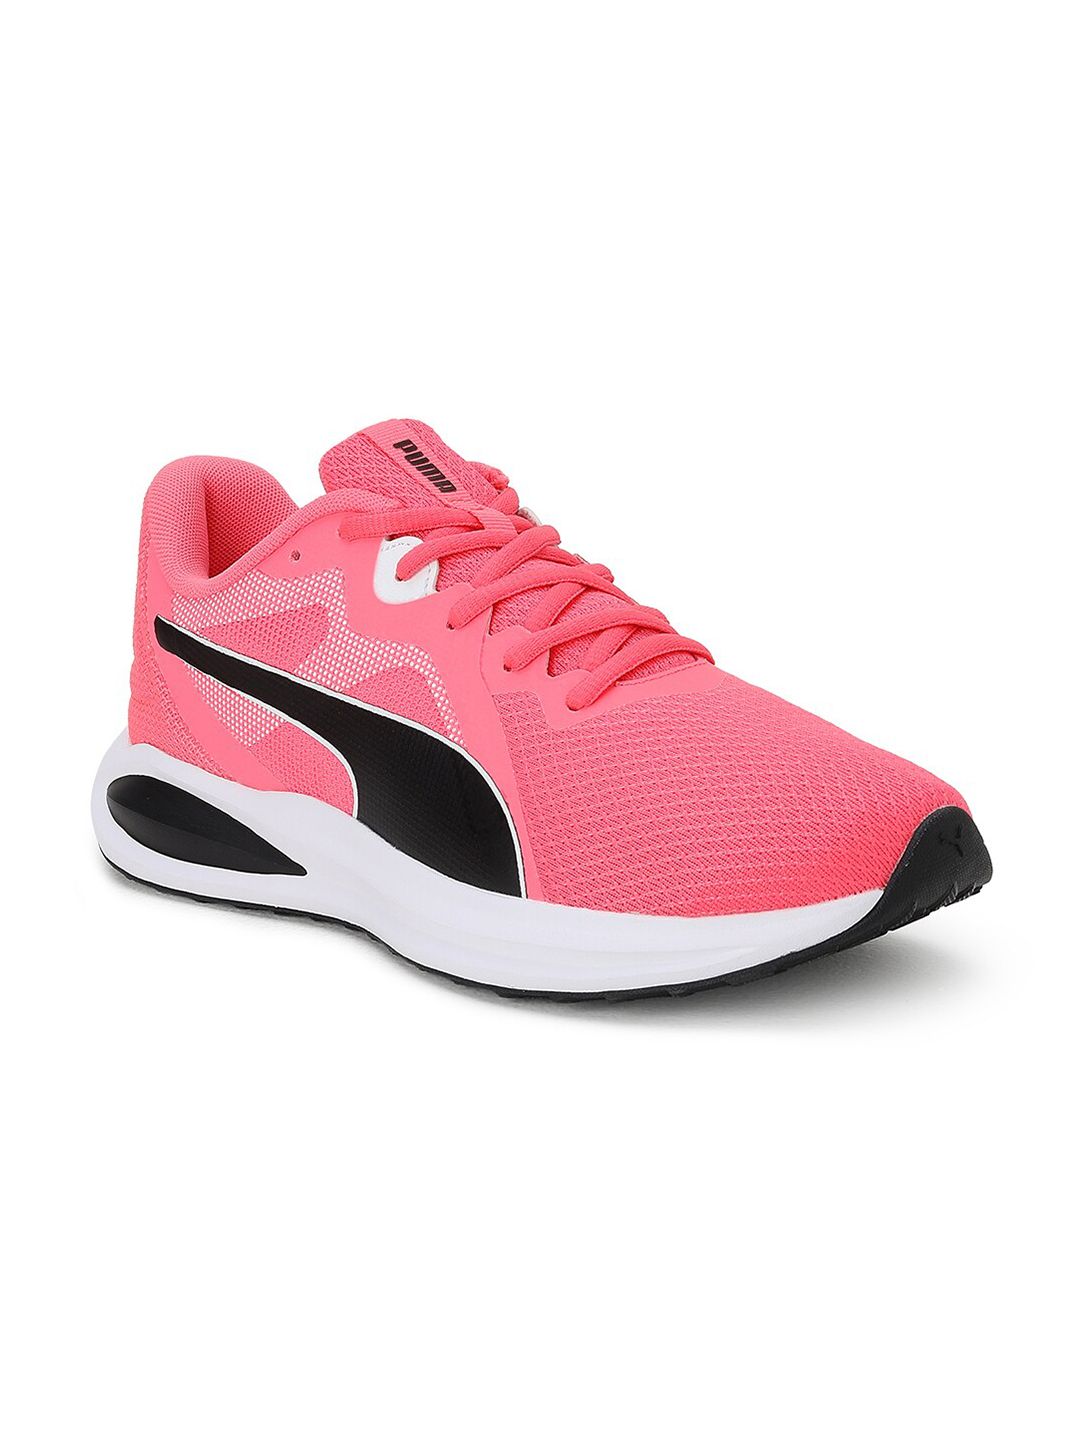 Puma Women Pink Textile Running Shoes Price in India